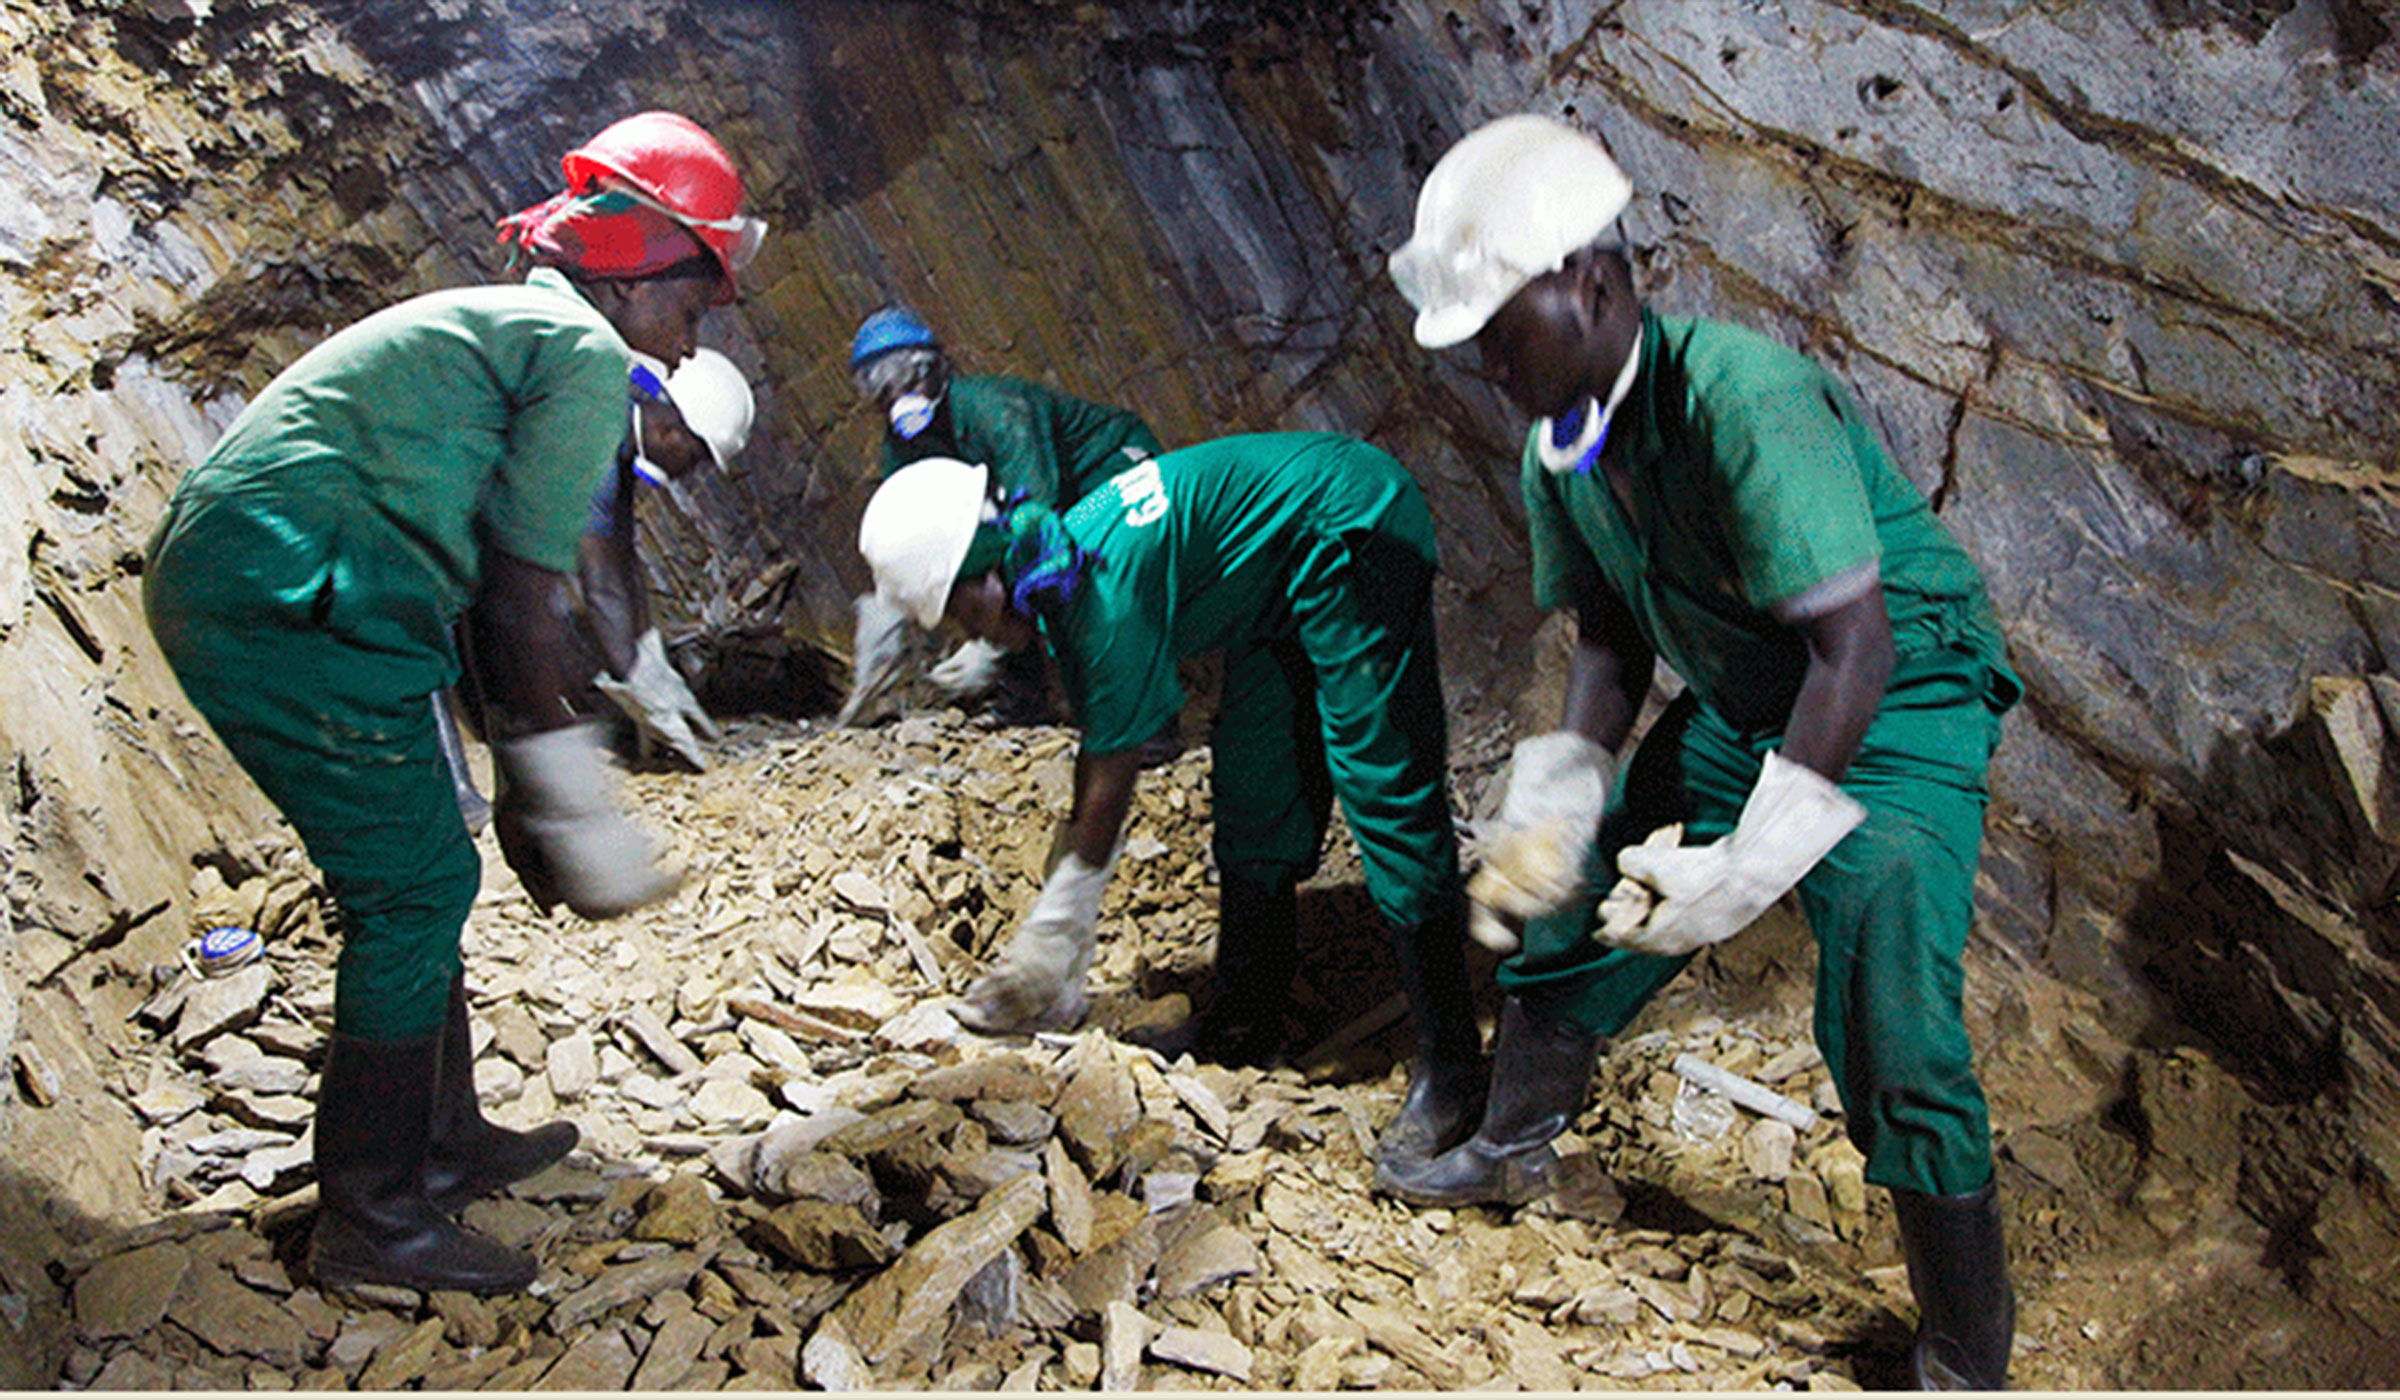 Miners at work inside Mageragere mining site in Nyarugenge District last year. File